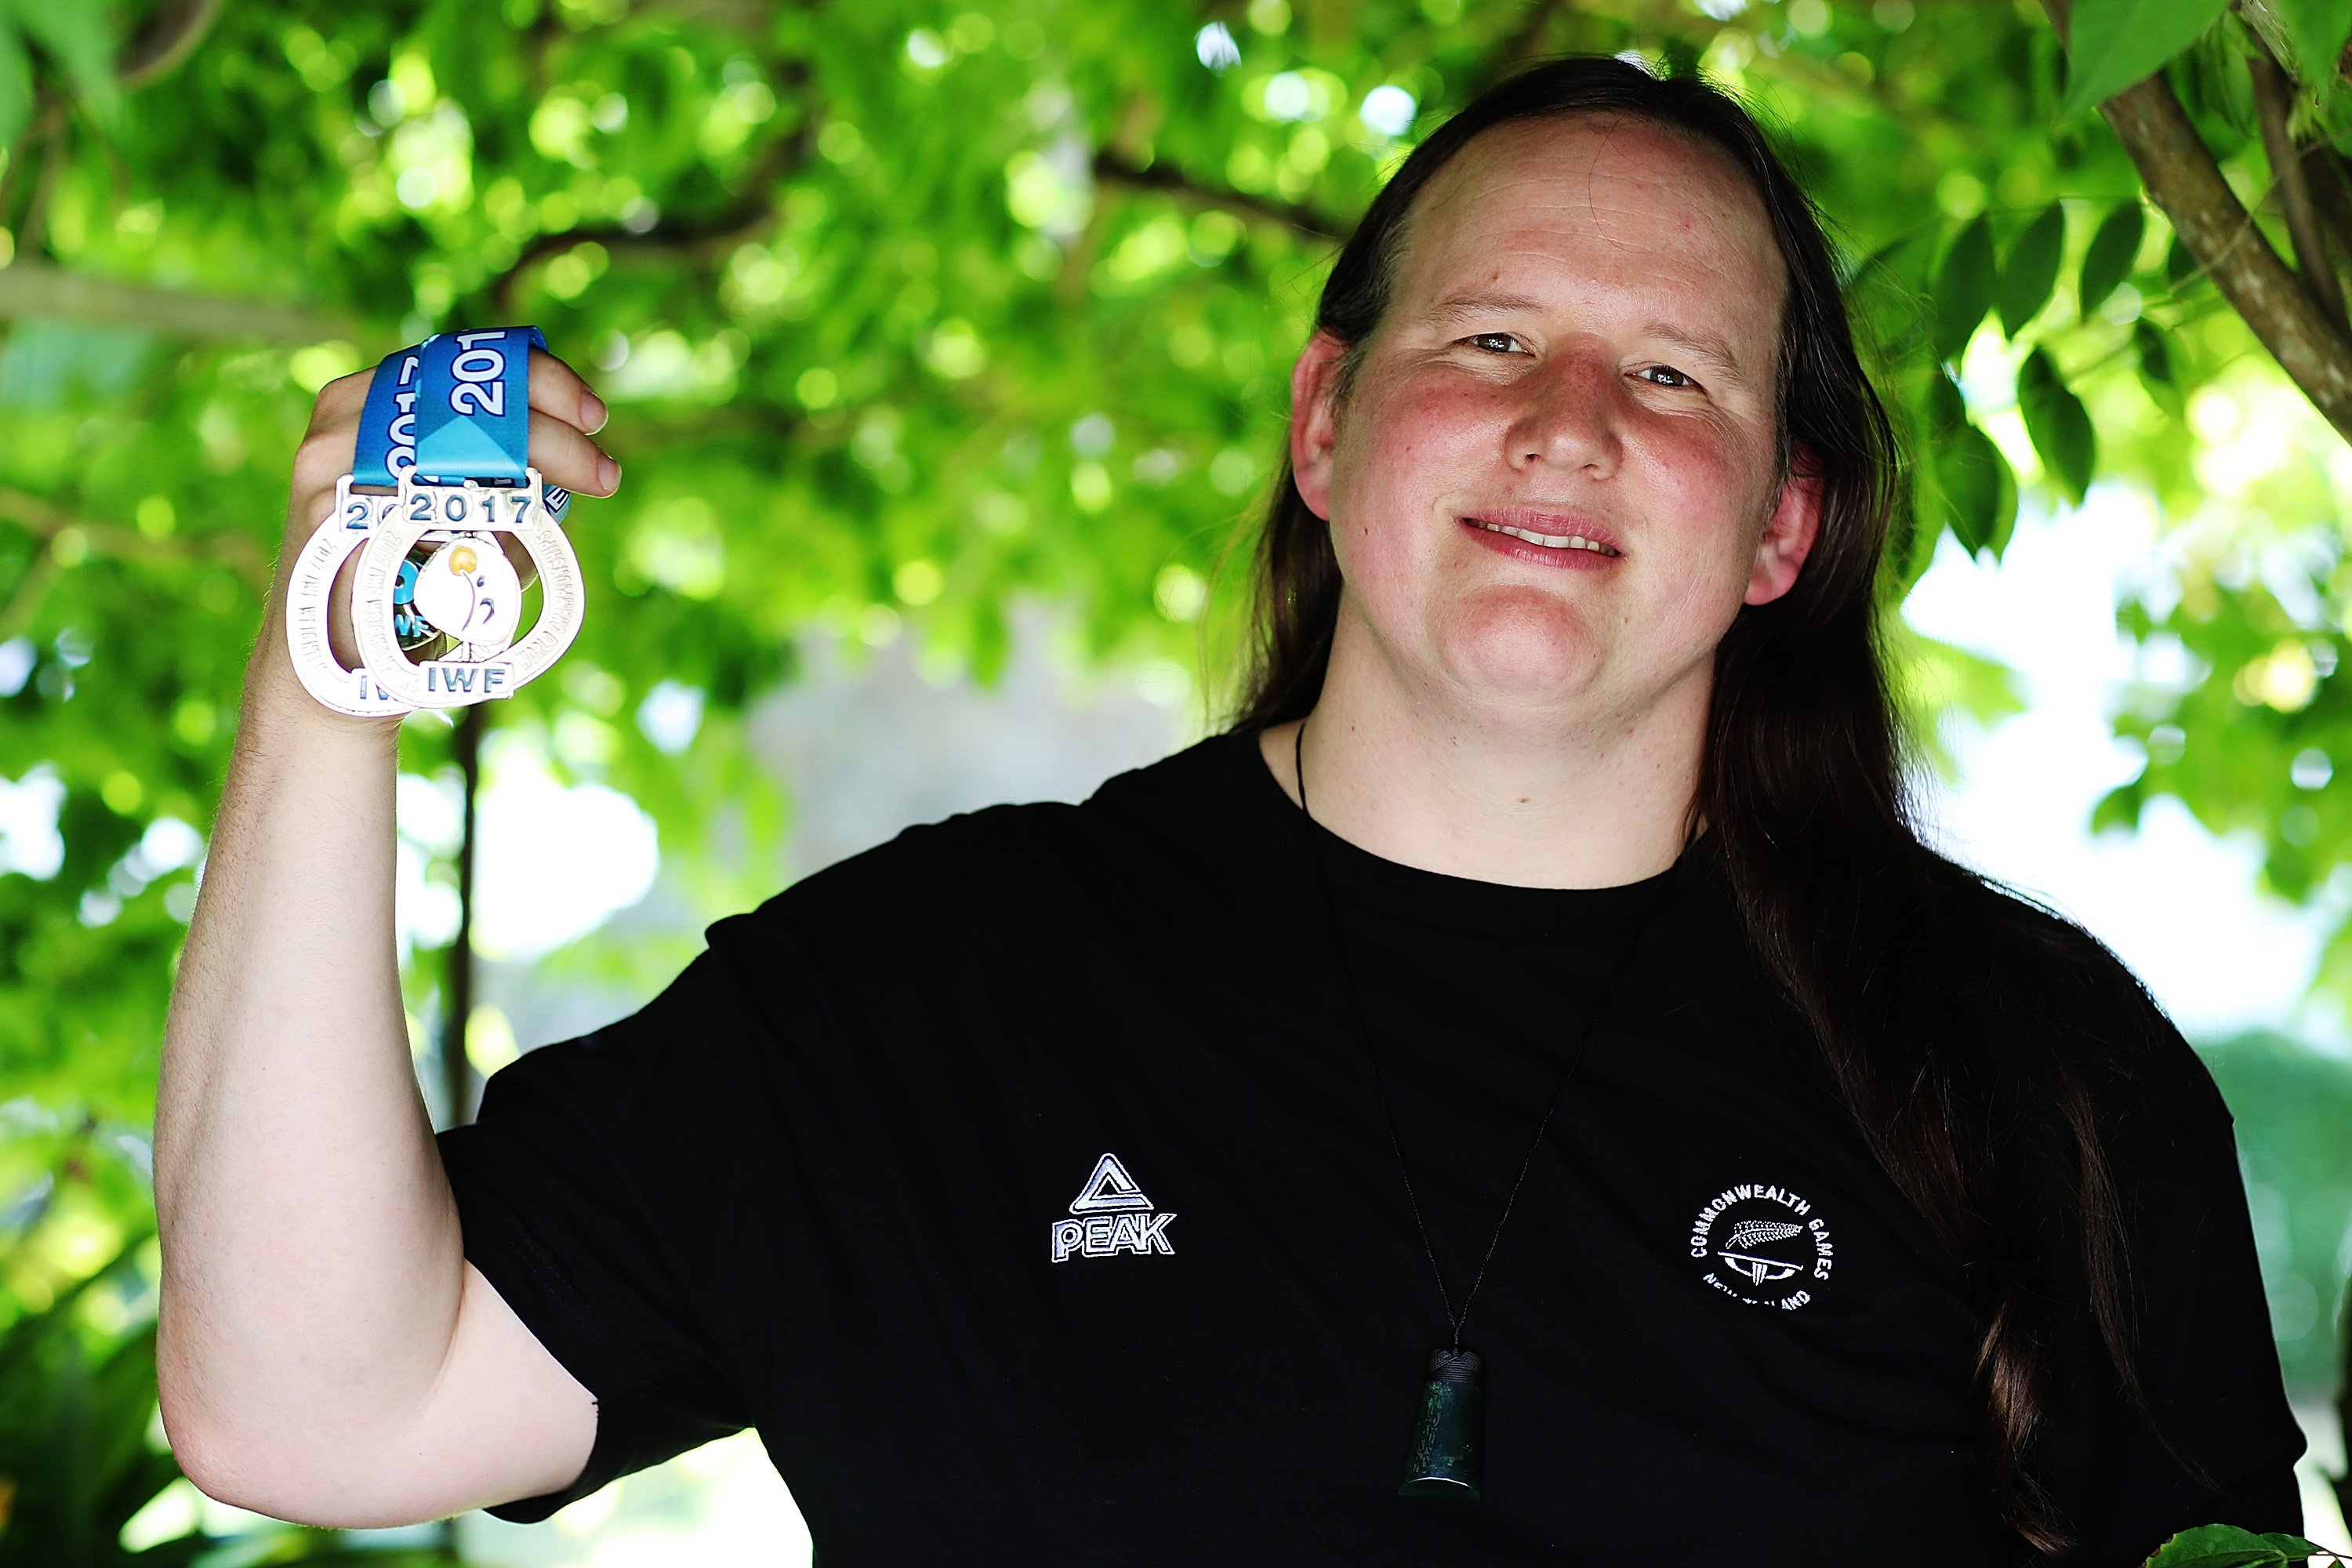 Transgender weightlifter Laurel Hubbard posing with two of her medals during a photoshoot in Auckland, New Zealand | Photo: Hannah Peters/Getty Images